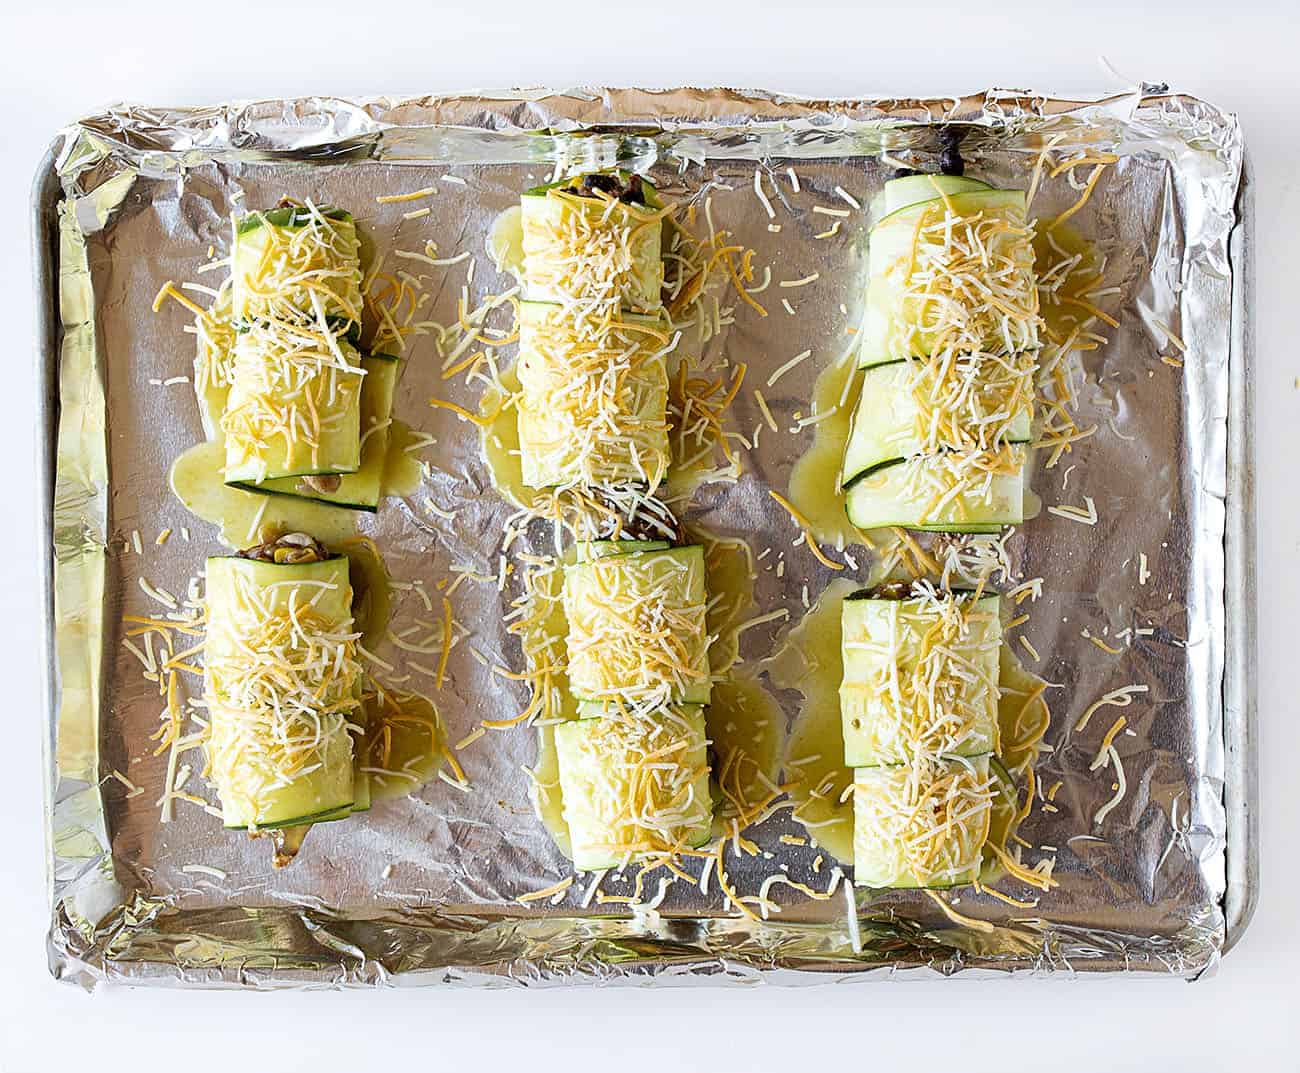 Zucchini Roll Ups before Being Cooked and Sprinkled with Cheese